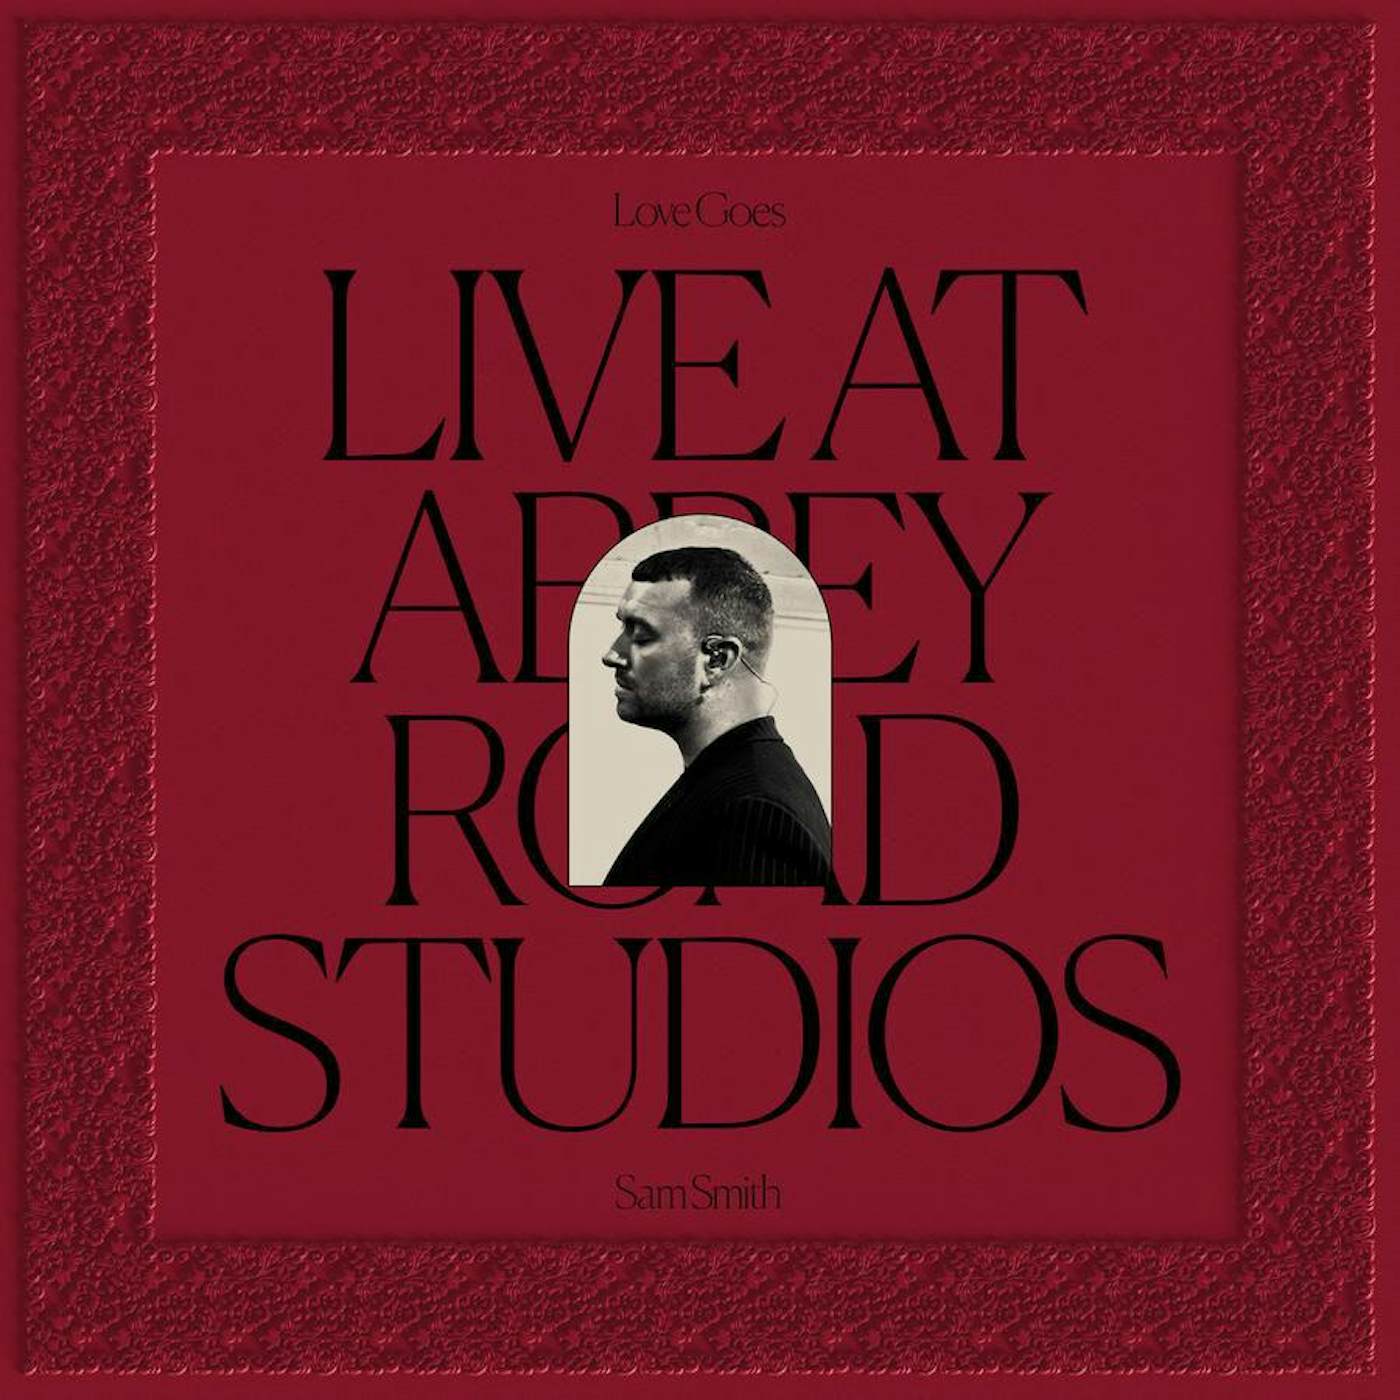 Sam Smith LOVE GOES (LIVE AT ABBEY ROAD STUDIOS) CD